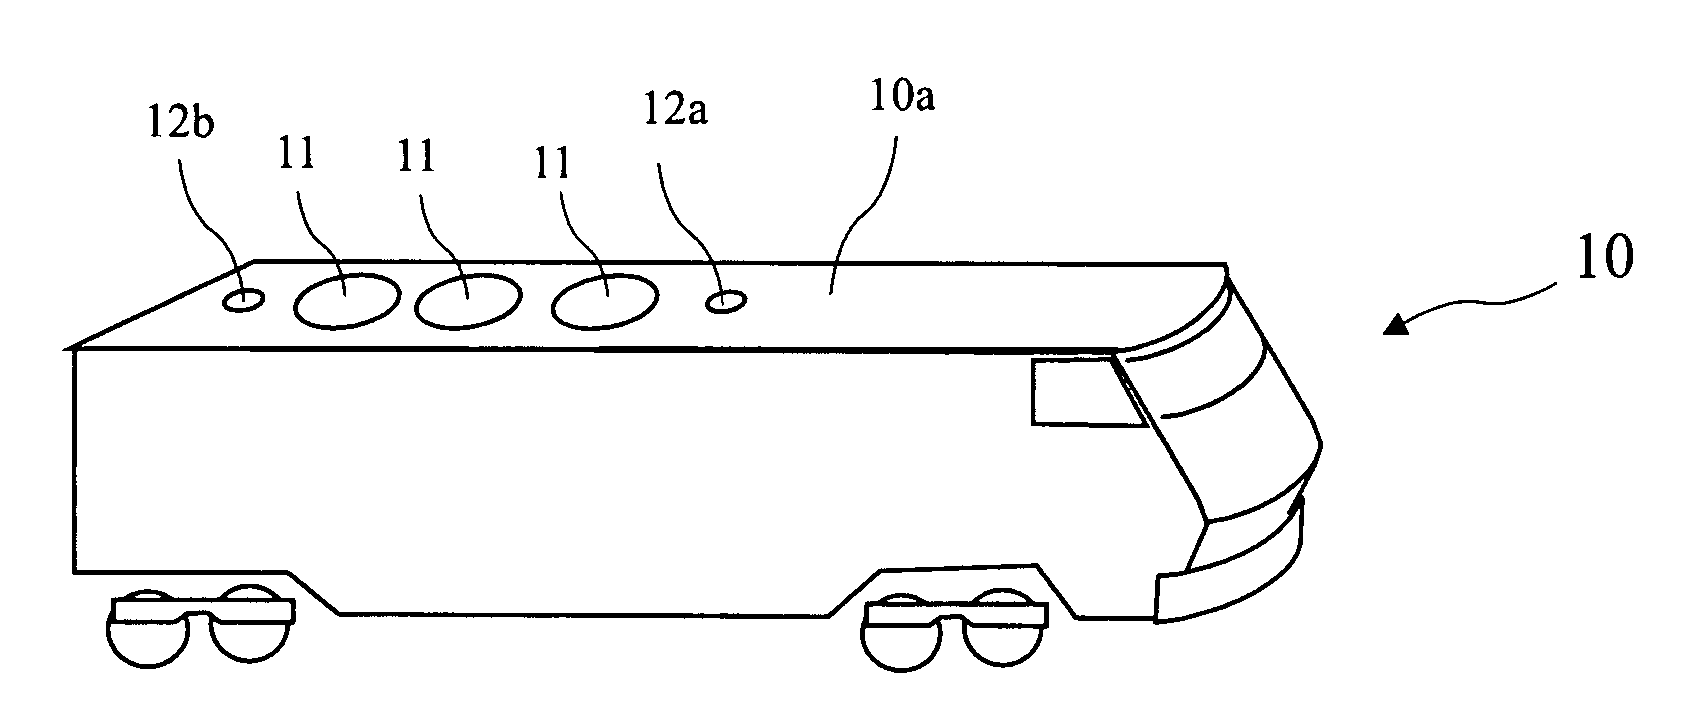 Exhaust intake bonnet for capturing exhausts from diesel-powered locomotives